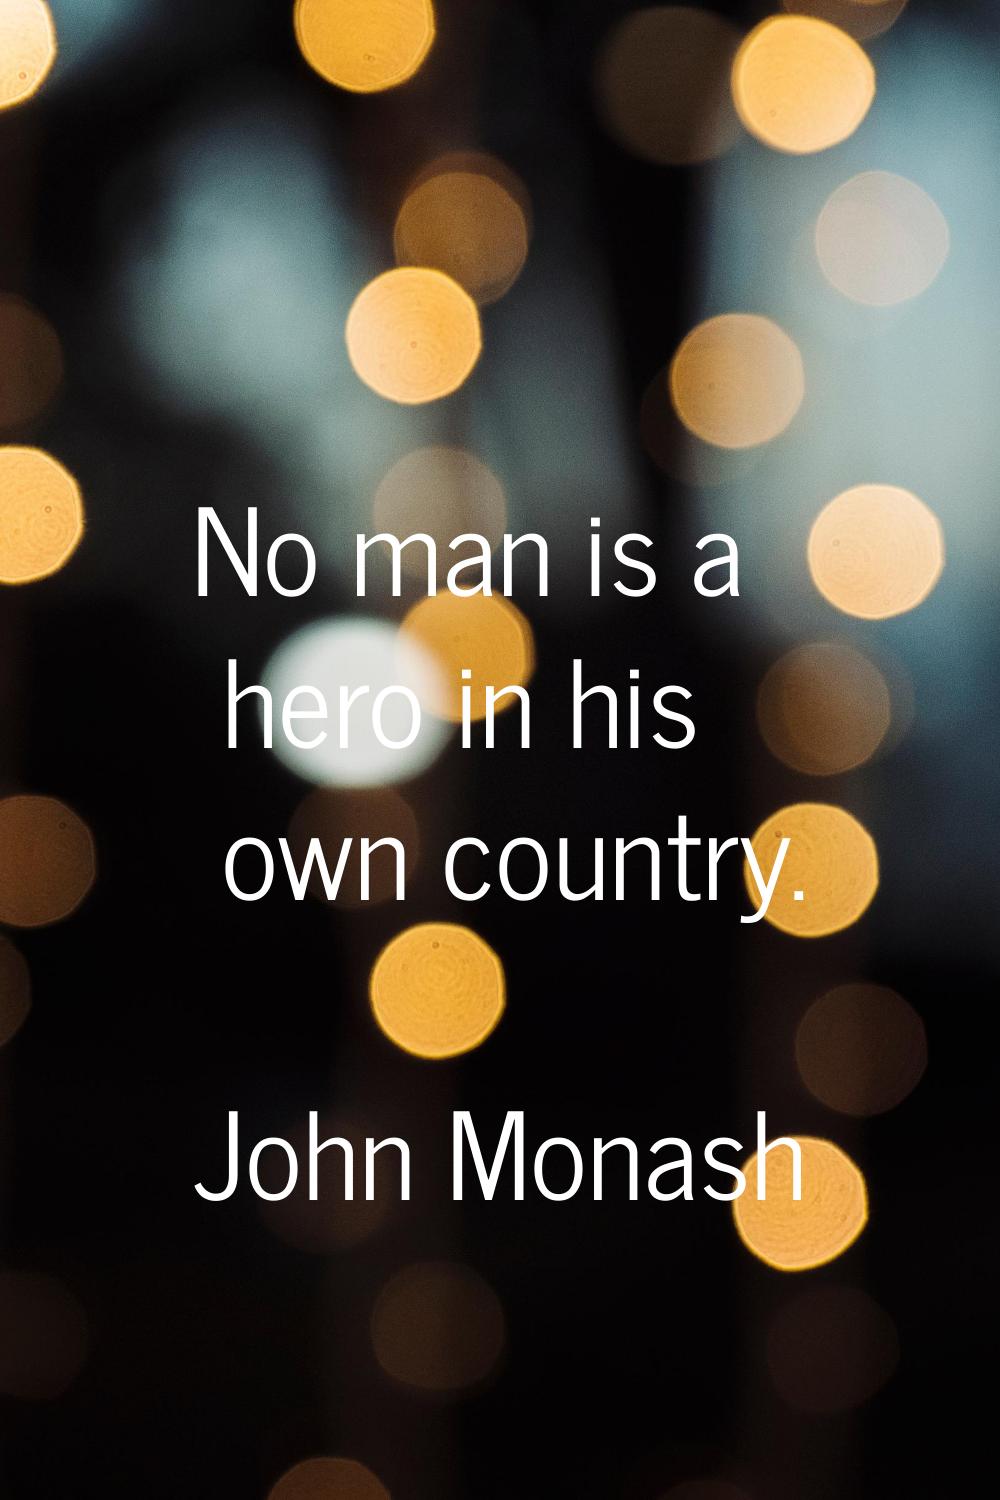 No man is a hero in his own country.